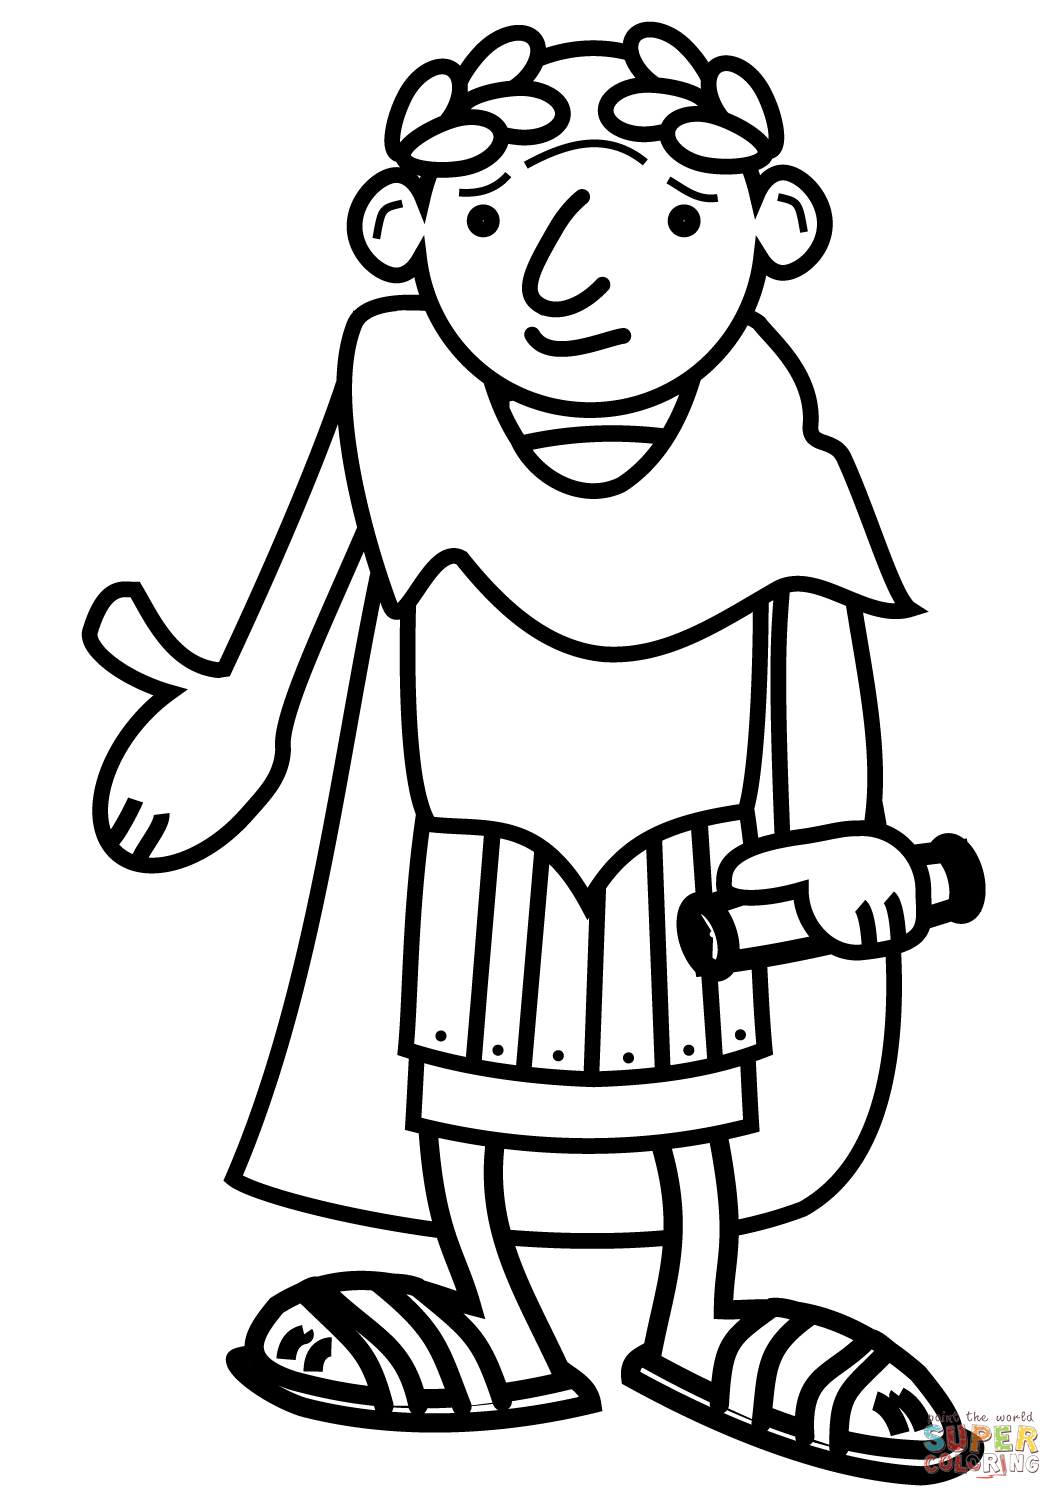 Free Rome Coloring Page, Download Free Rome Coloring Page png images